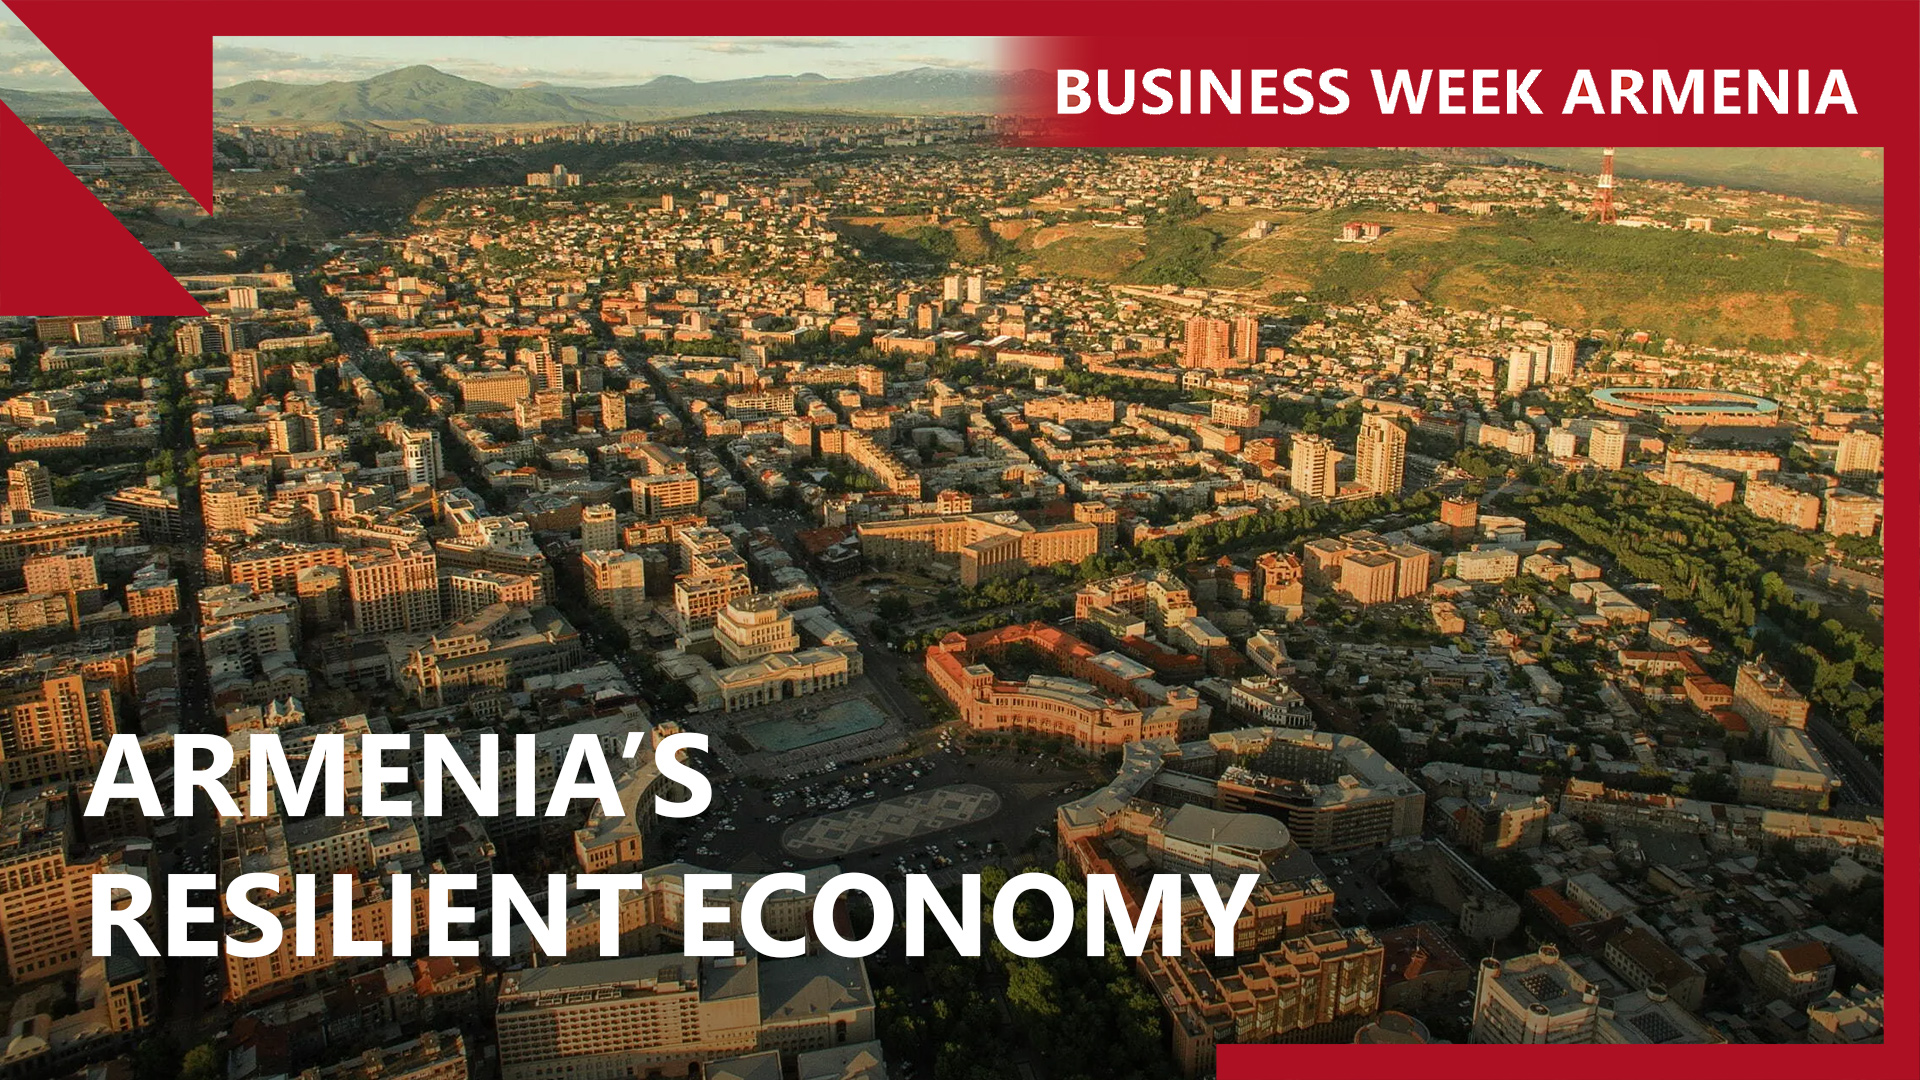 Karabakh conflict has not affected Armenia’s credit rating, Fitch says: THIS WEEK IN BUSINESS